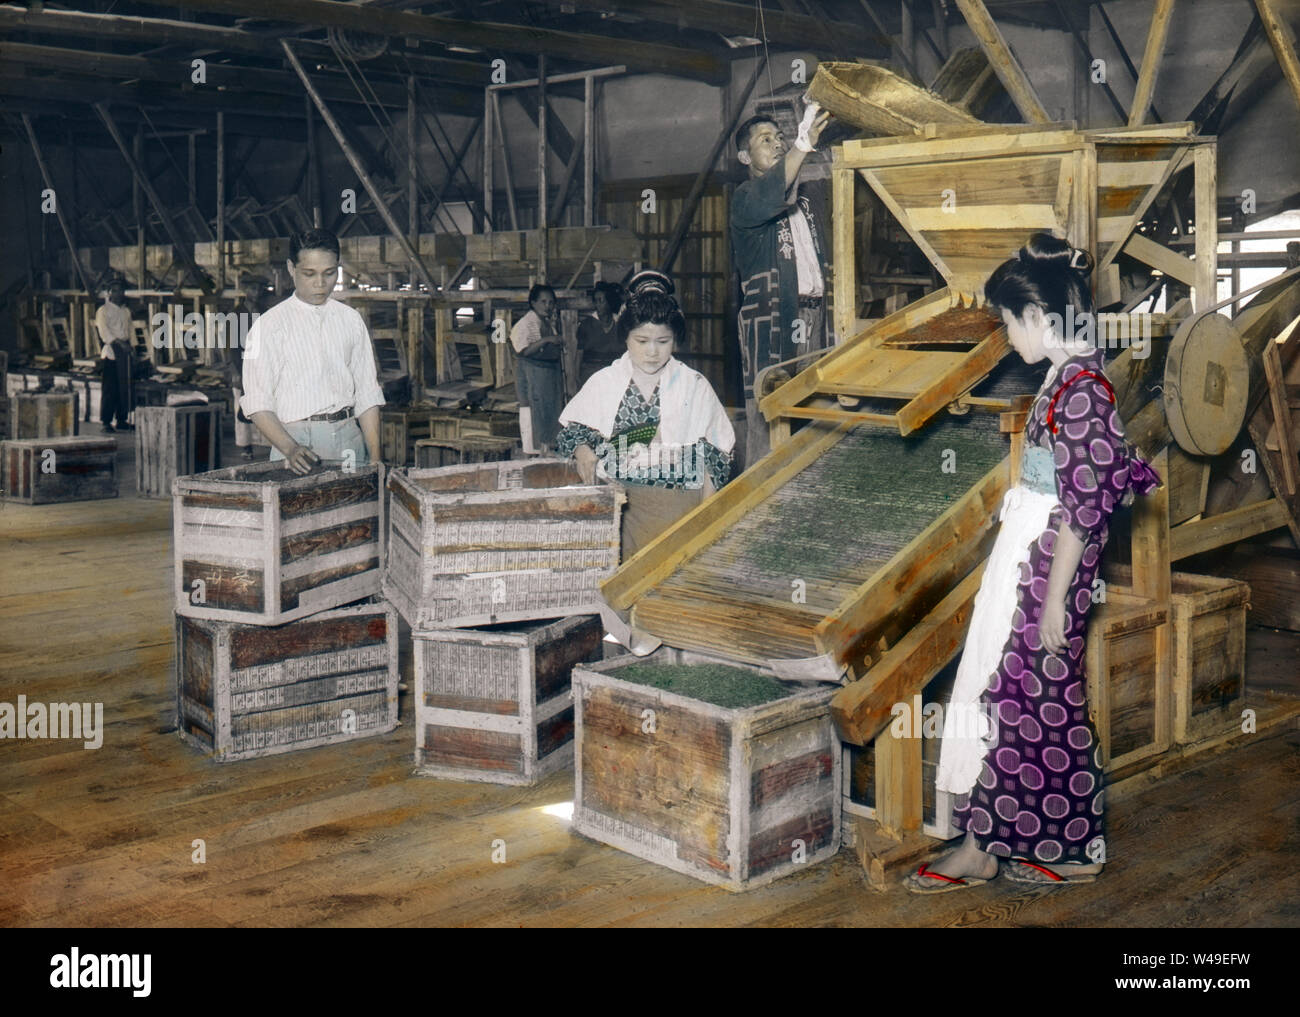 [ 1920s Japan - Japanese Tea Factory ] —   Japanese workers in Shizuoka Prefecture winnowing green tea leaves using a mechanized machine.  20th century vintage glass slide. Stock Photo